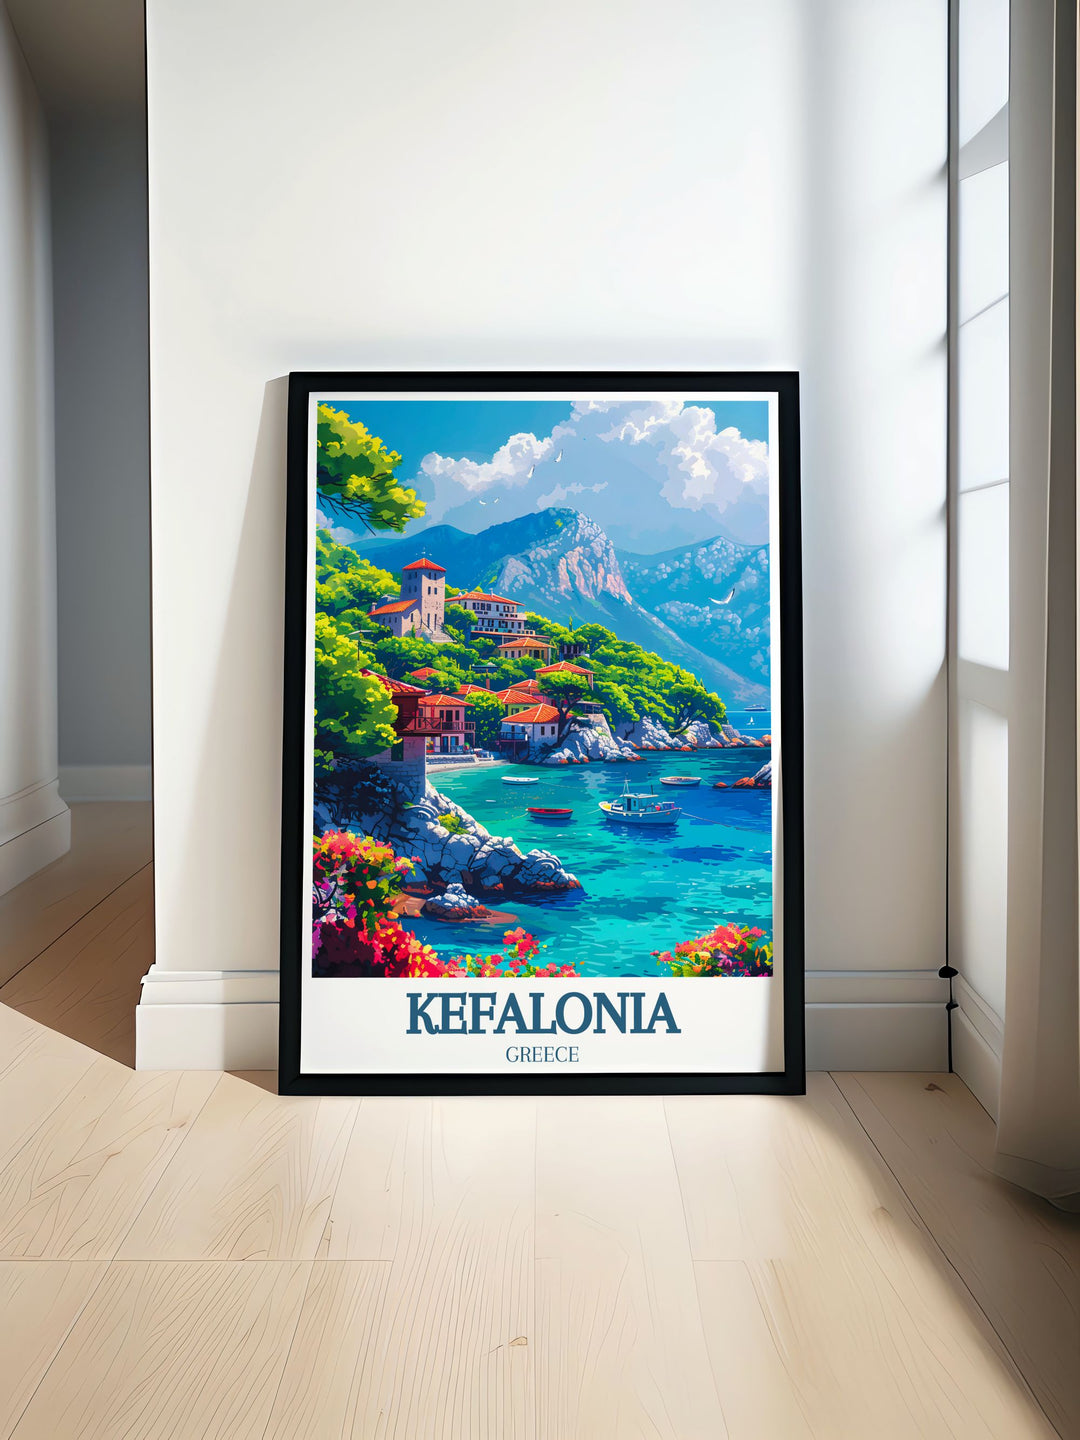 An art print of Kefalonia, emphasizing its crystal clear waters, dramatic coastlines, and charming villages. The illustration celebrates the islands scenic beauty and cultural richness.